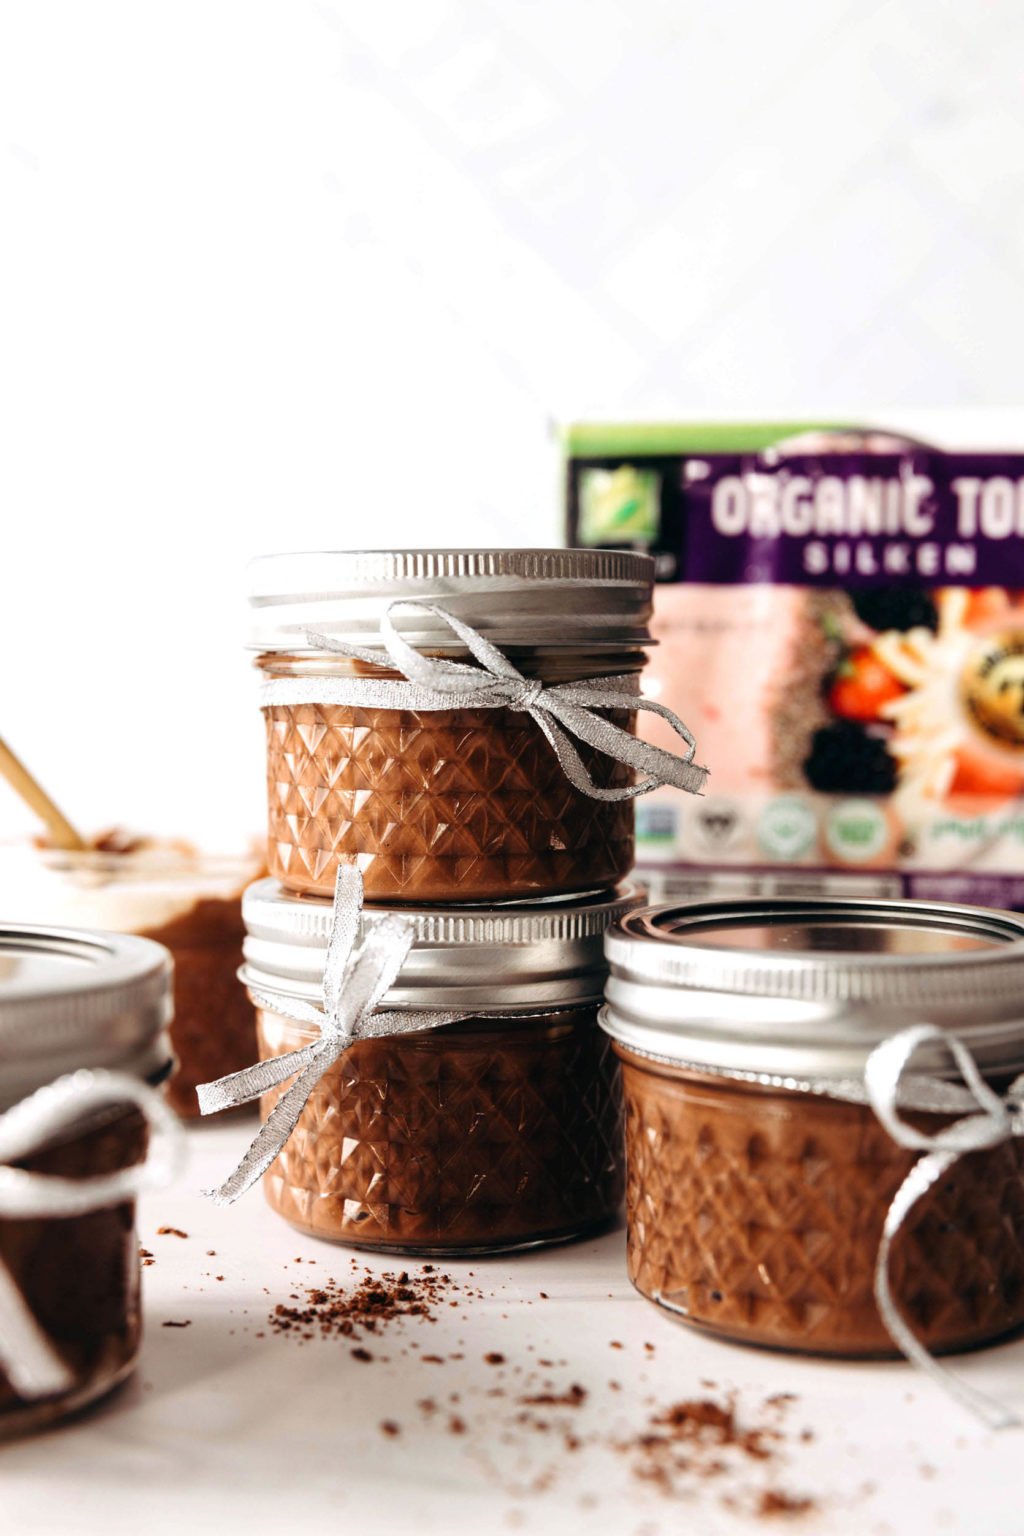 Small mason jars are stacked upon each other on a white surface. They're filled with chocolate pudding and tied with a silver ribbon. Two packages of silken tofu are pictured in the background.